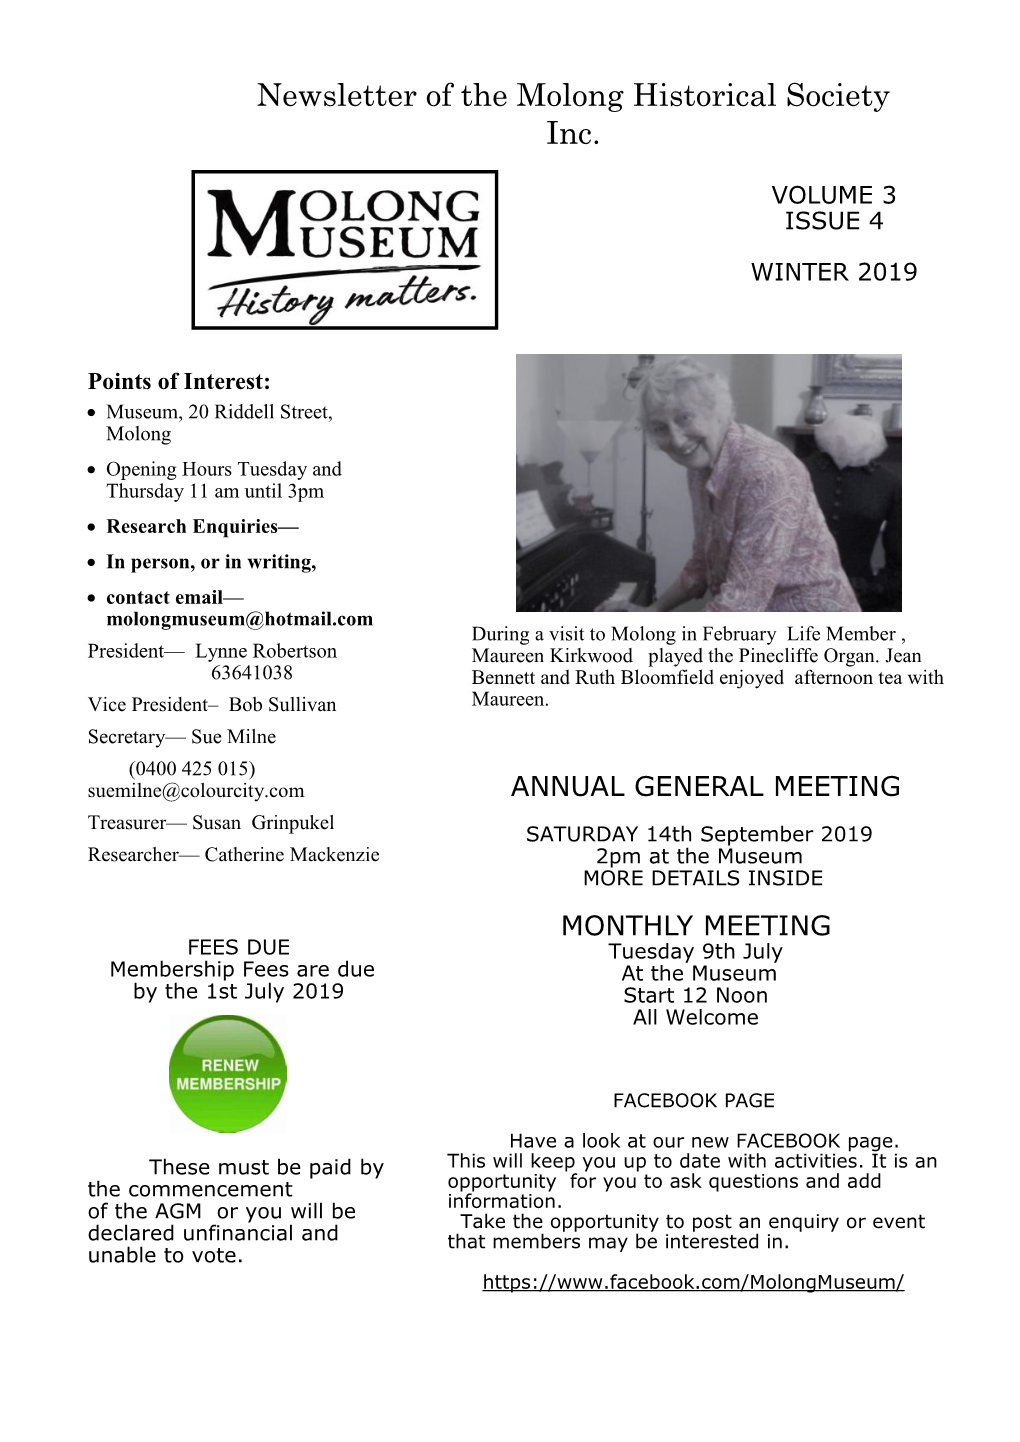 Newsletter of the Molong Historical Society Inc